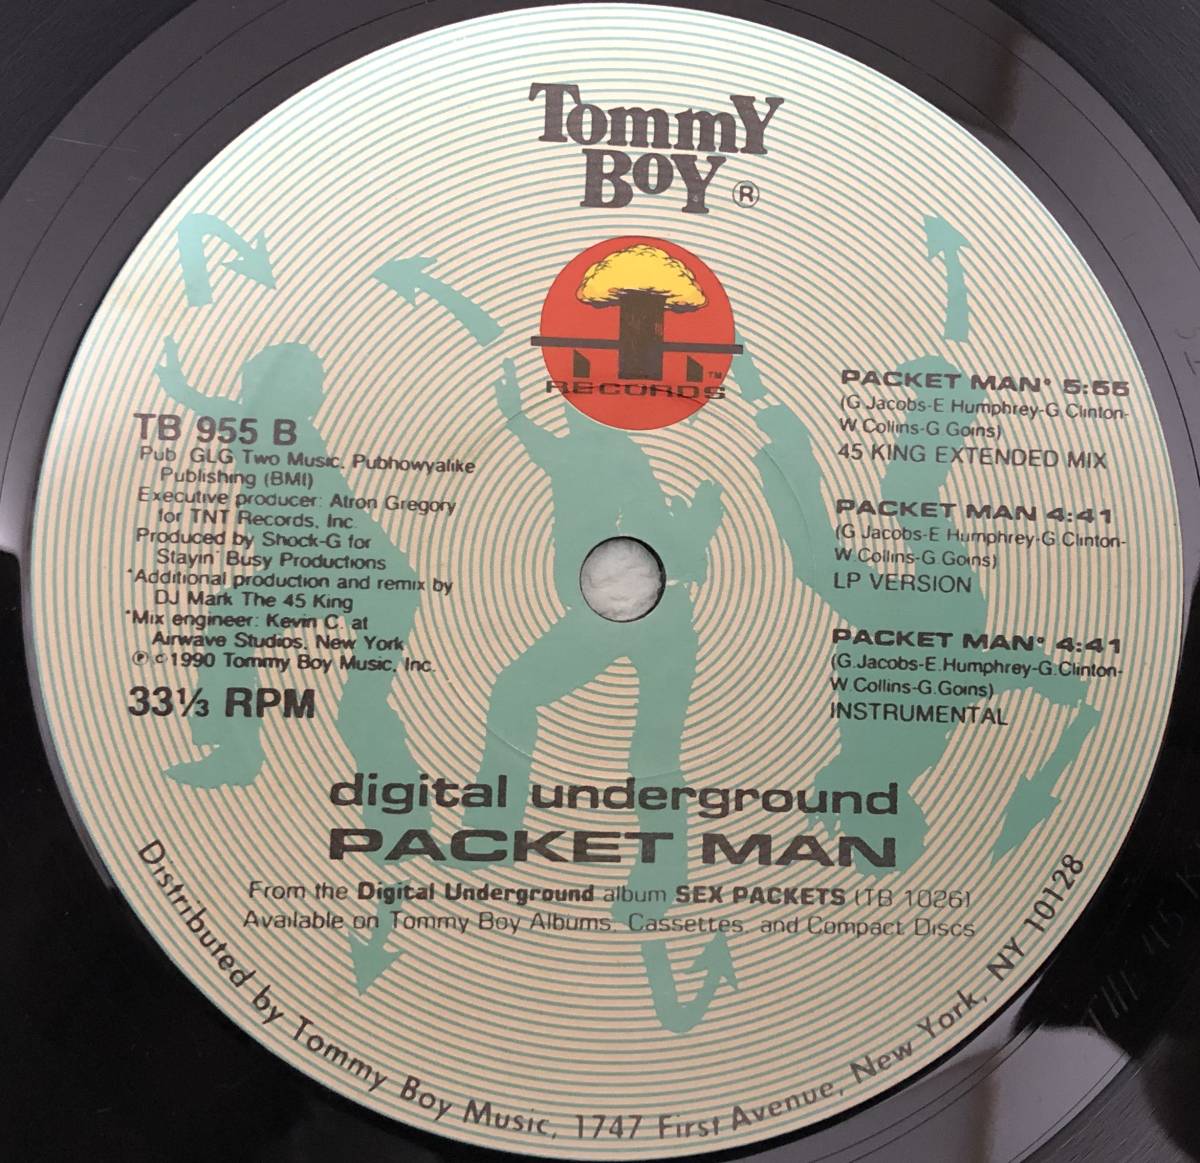 OLD MIDDLE 放出中 / DIGITAL UNDERGROUND 2PAC / PACKET MAN (MARK THE 45 KING PRO) / DOOWUTCHYALIKE / 1990 HIPHOP / US ORIGINAL_画像4